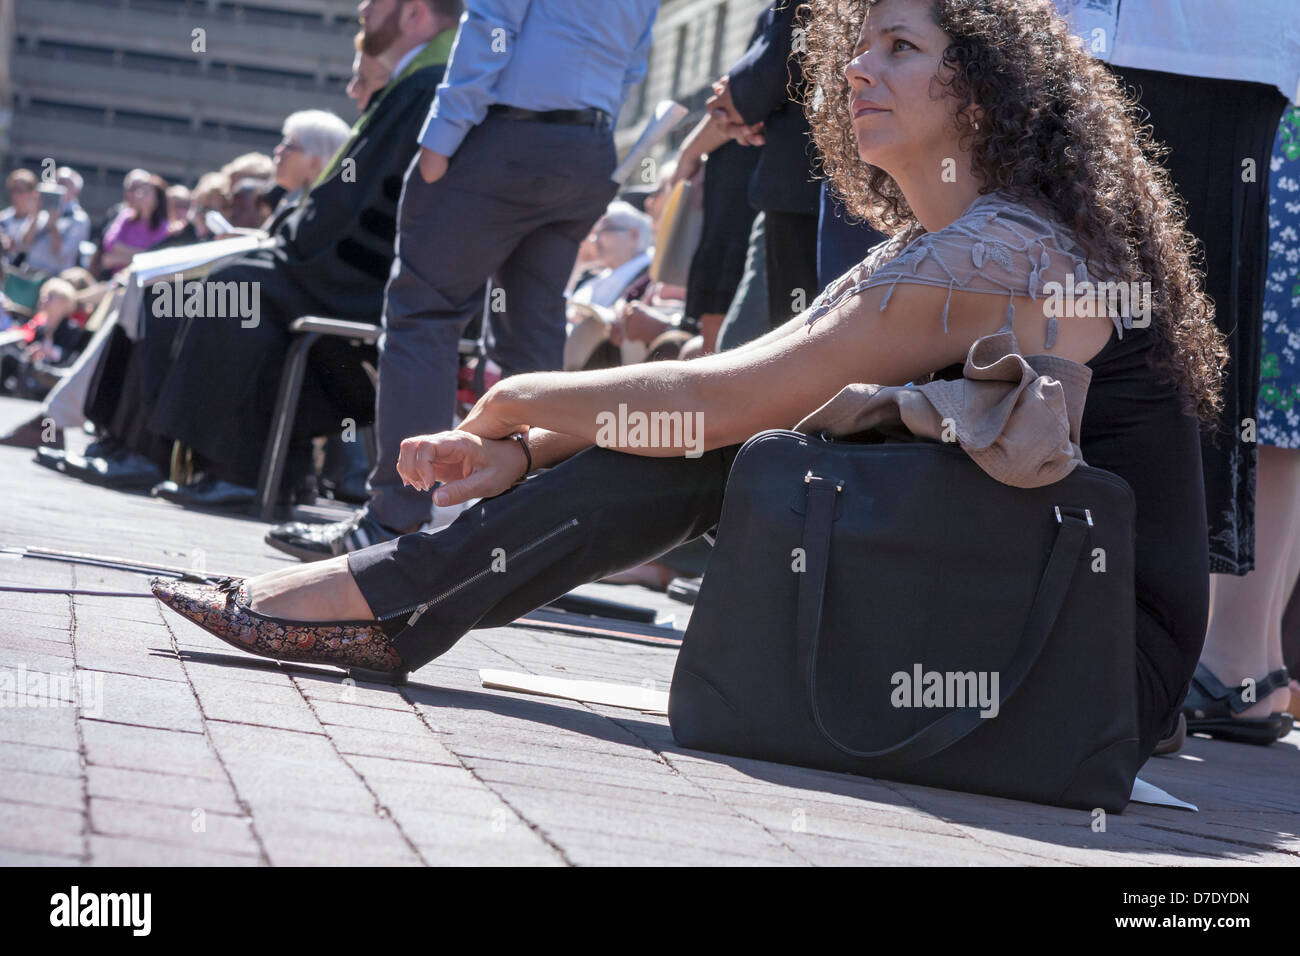 A woman listens intently during an outdoor memorial service in Boston. Stock Photo